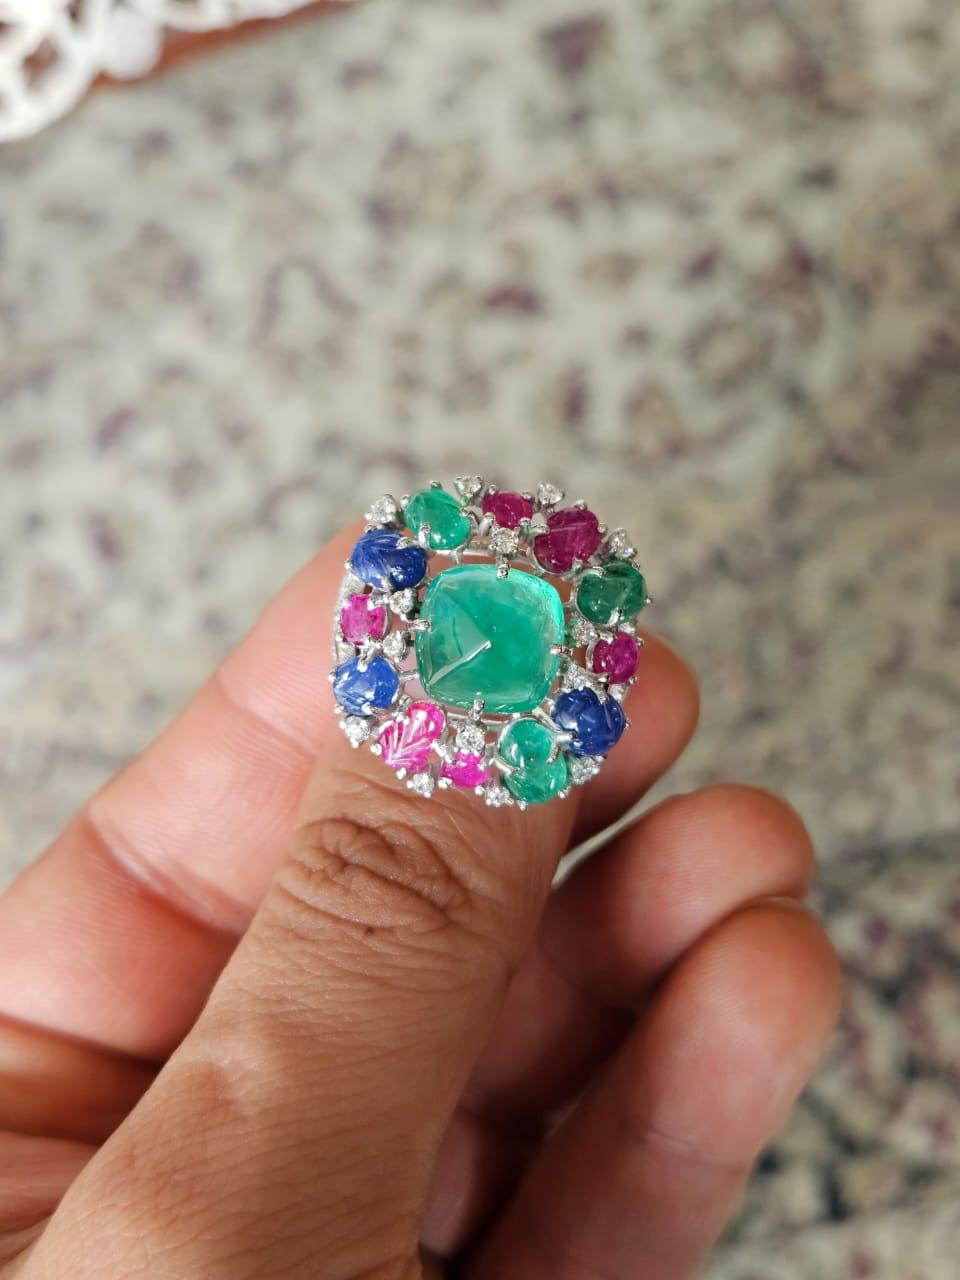 A very gorgeous & beautiful, one of a kind, Tutti Frutti style, Emerald, Blue Sapphire & Ruby Cocktail / Dome Ring set in 18K White Gold & Diamonds. The weight of the Emerald sugarloaf is 6.09 carats. The Emerald is completely natural, without any